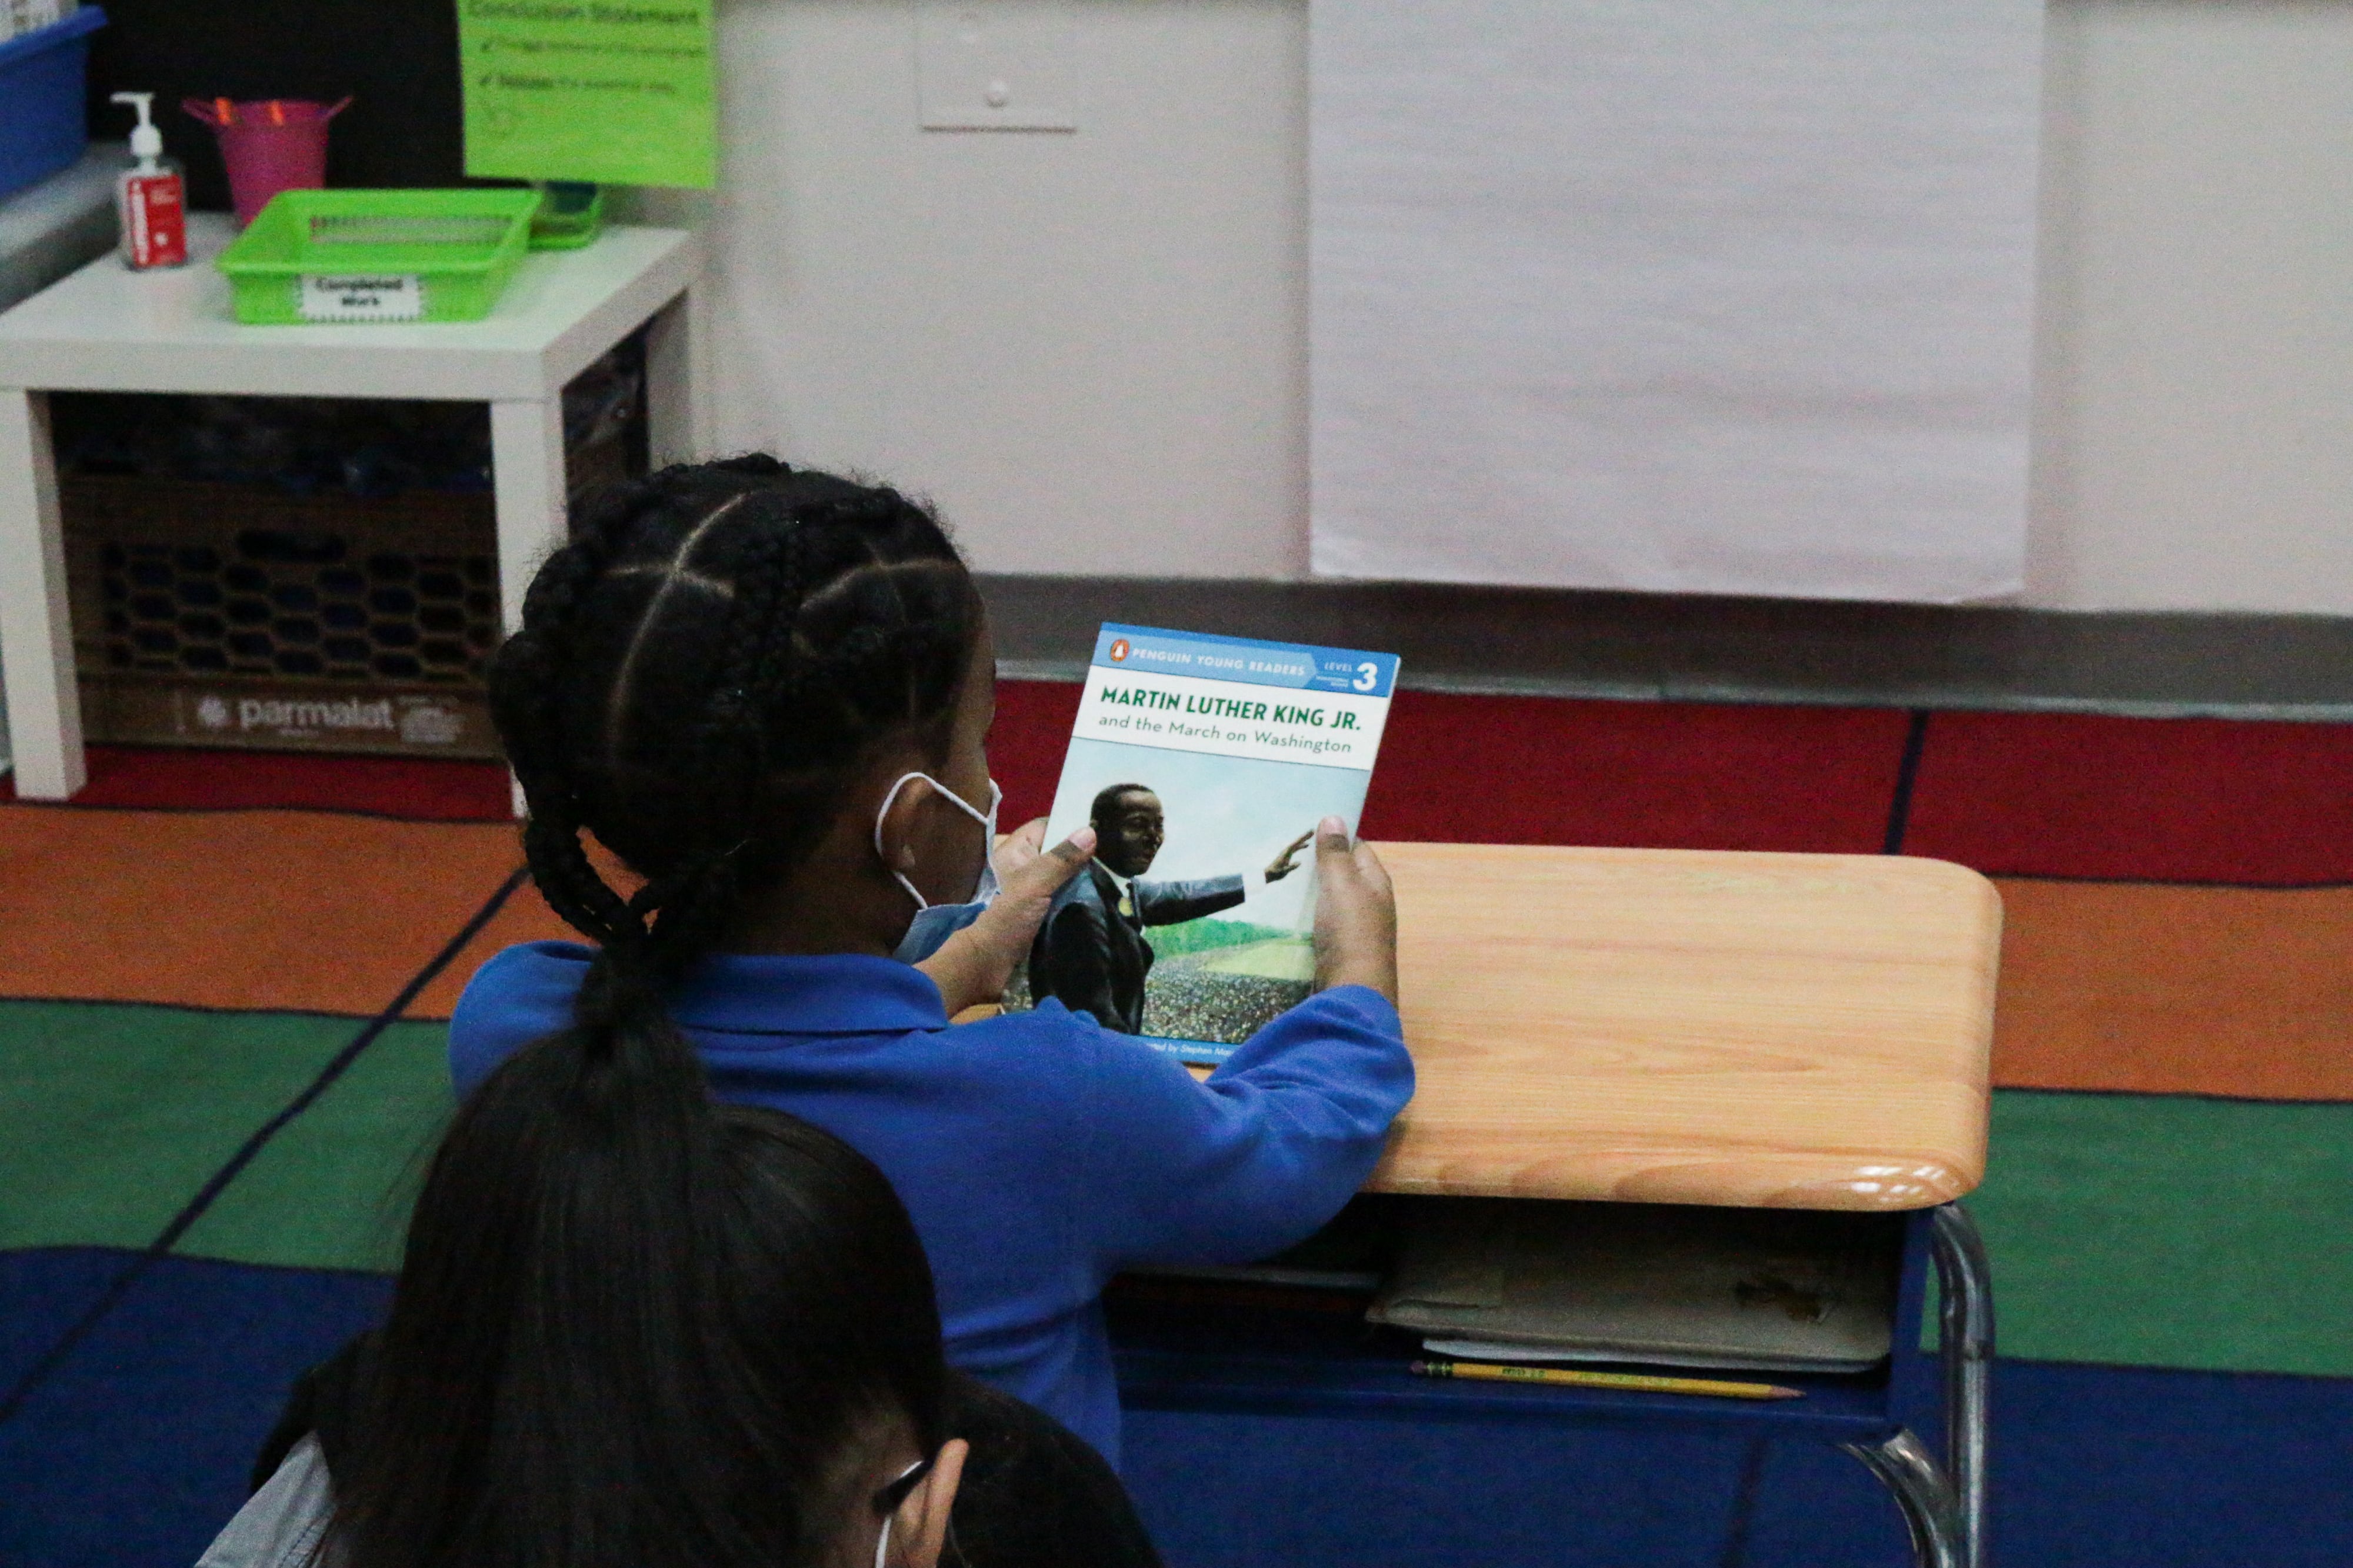 A student holds a book in front of them while they sit at their classroom desk.